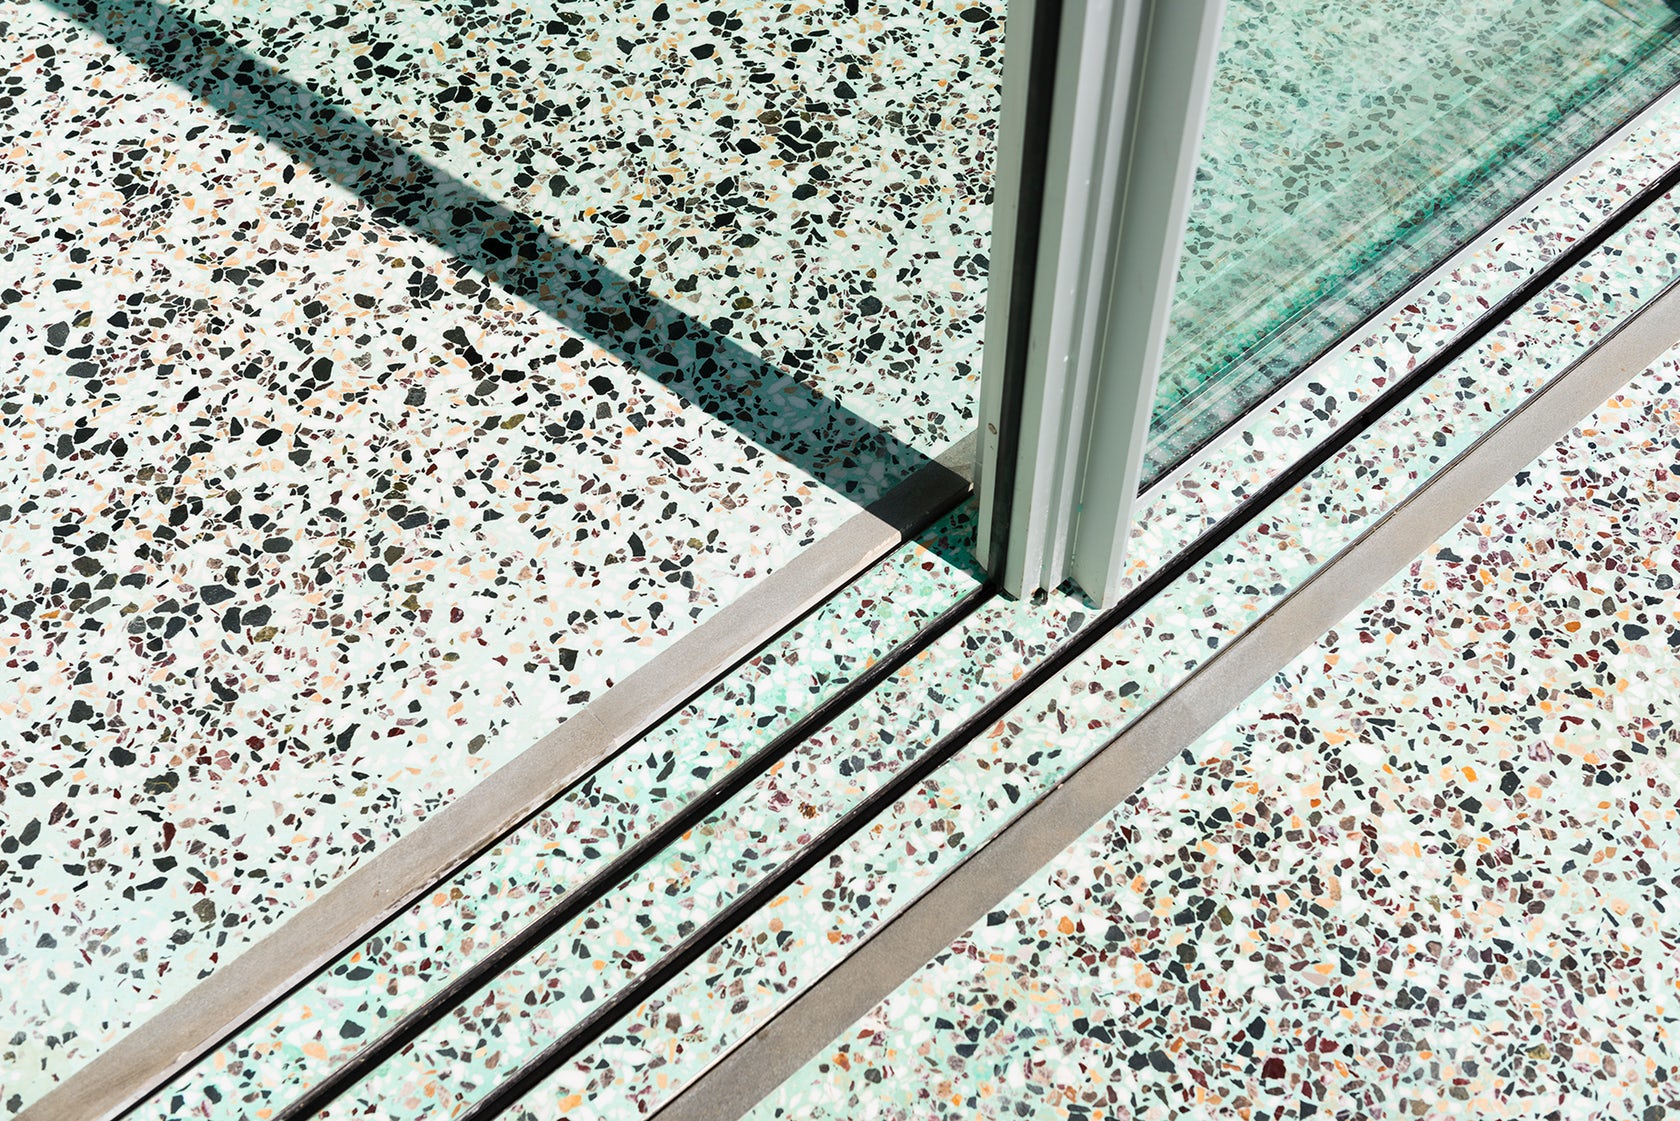 You are currently viewing Safety tips as regards using terrazzo tiles